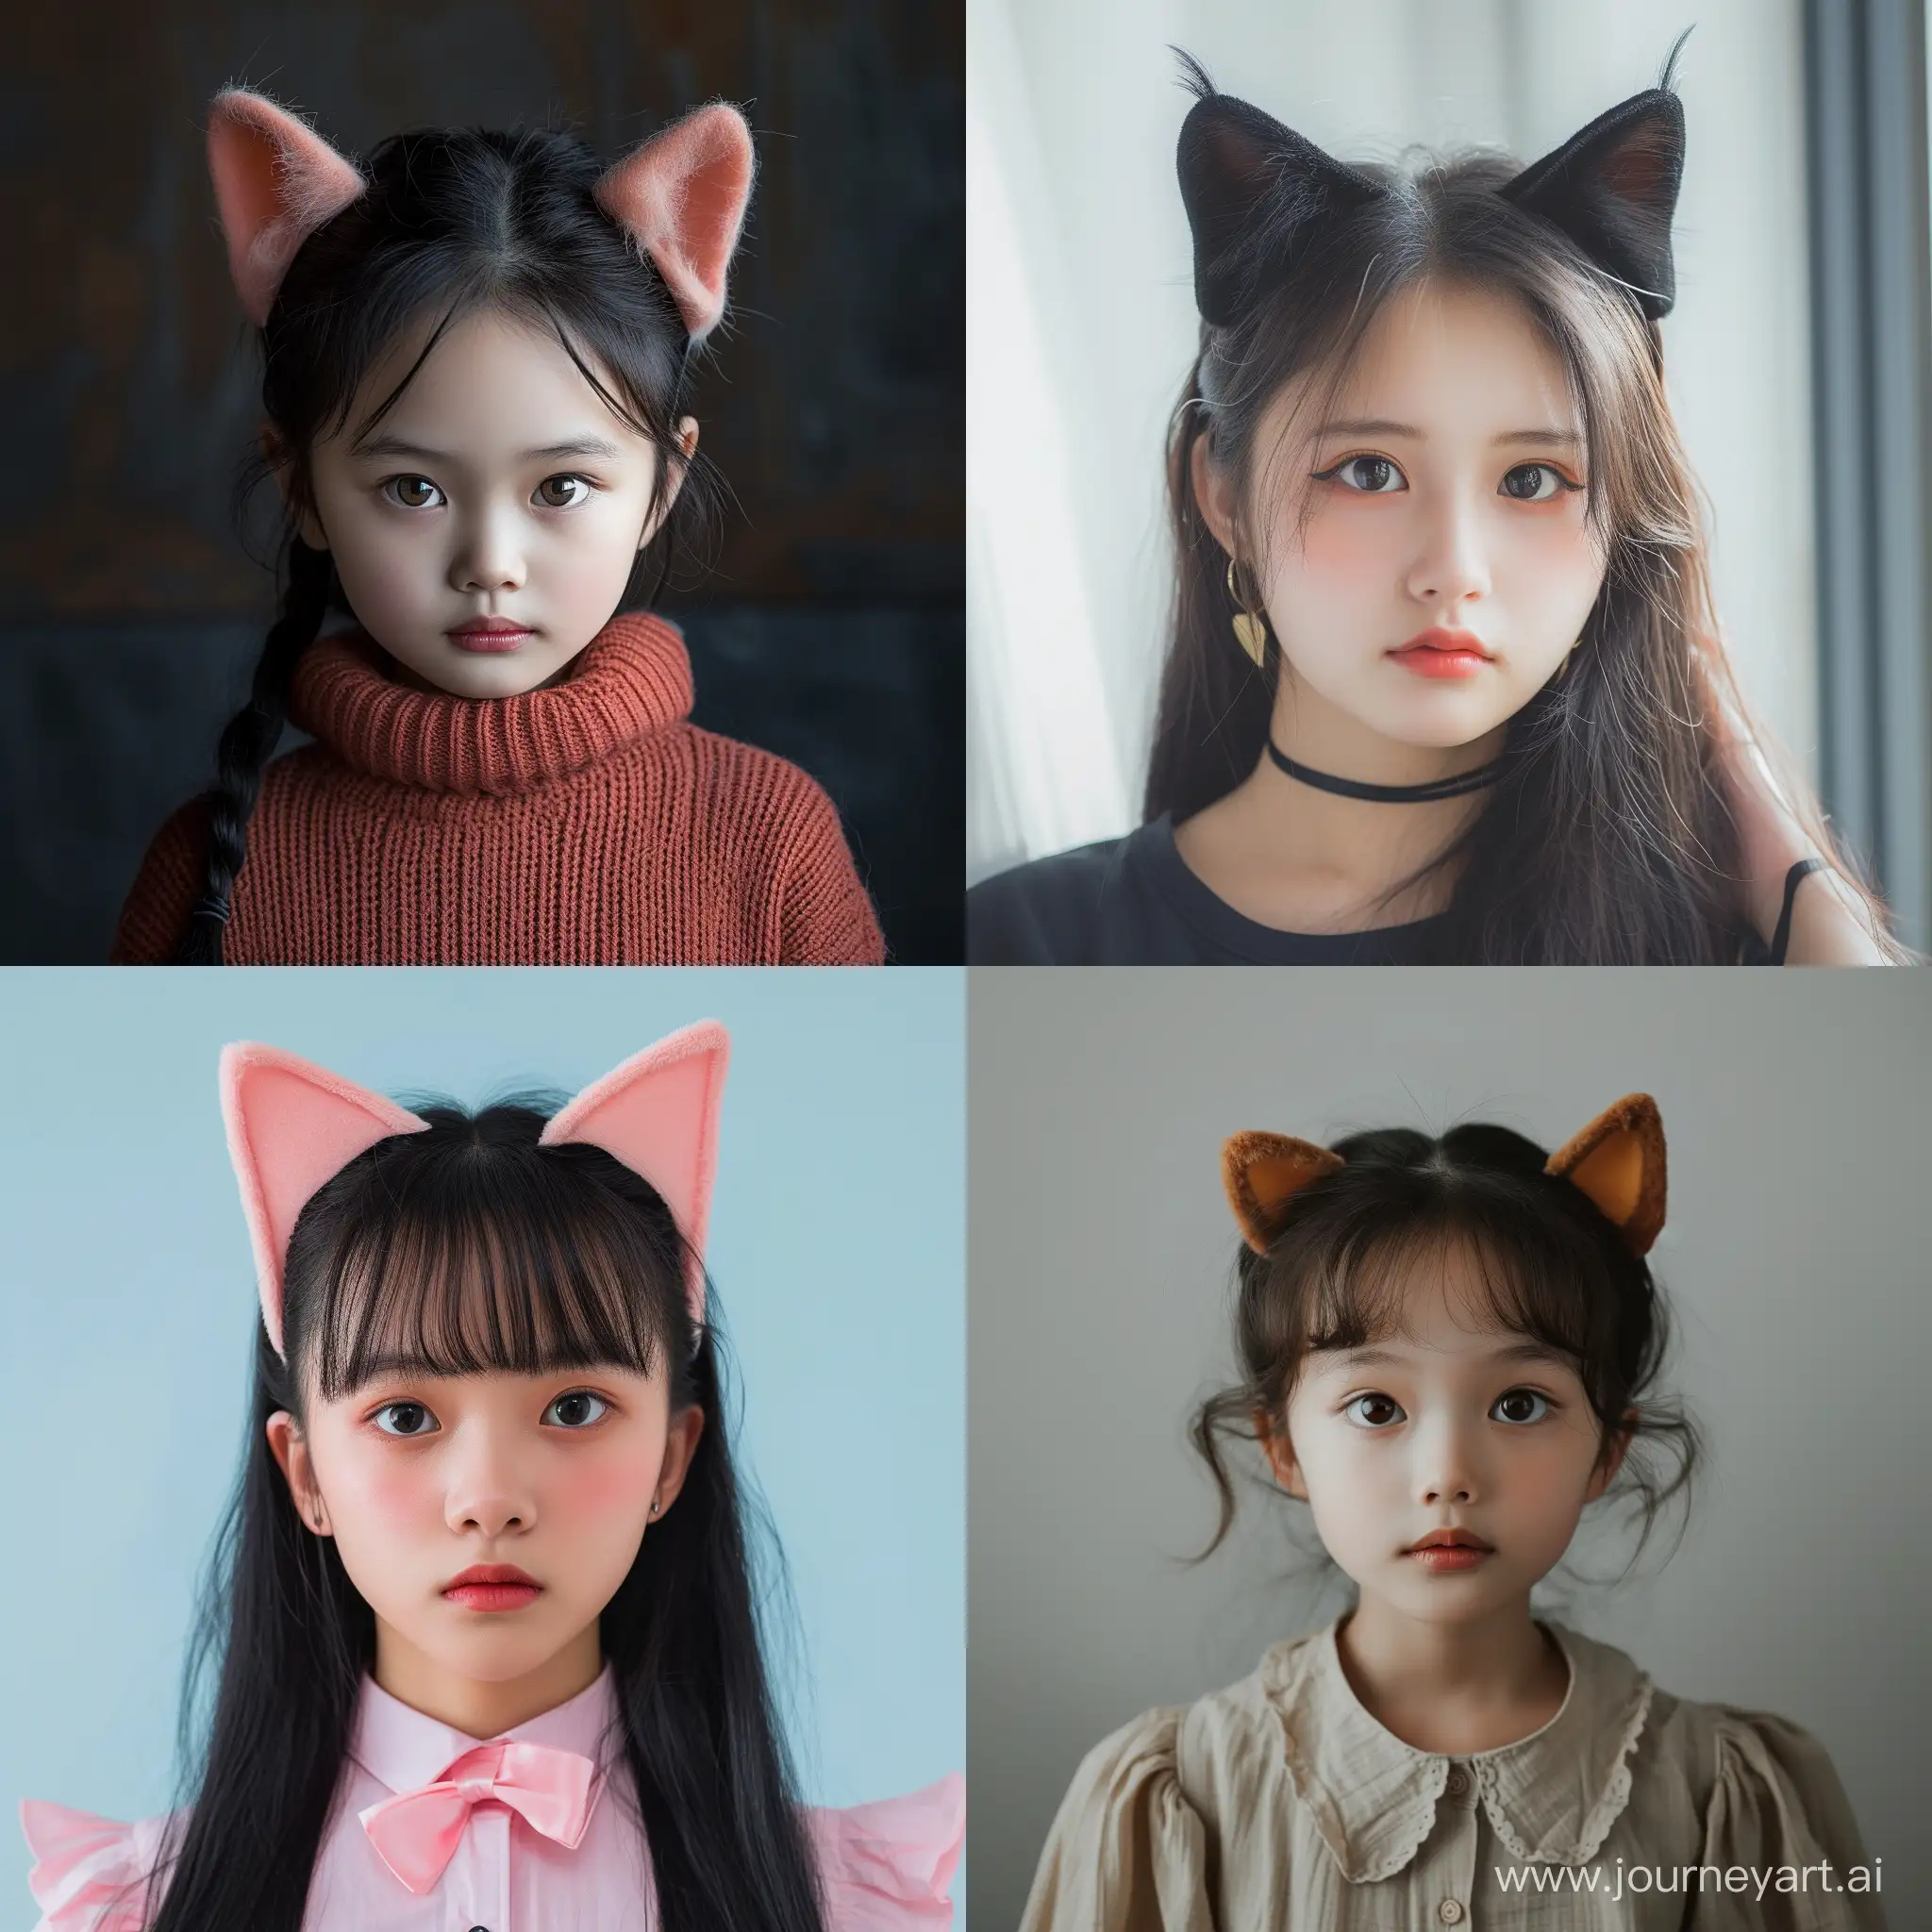 Adorable-Asian-Girl-Wearing-Cat-Ears-in-a-11-Aspect-Ratio-Snapshot